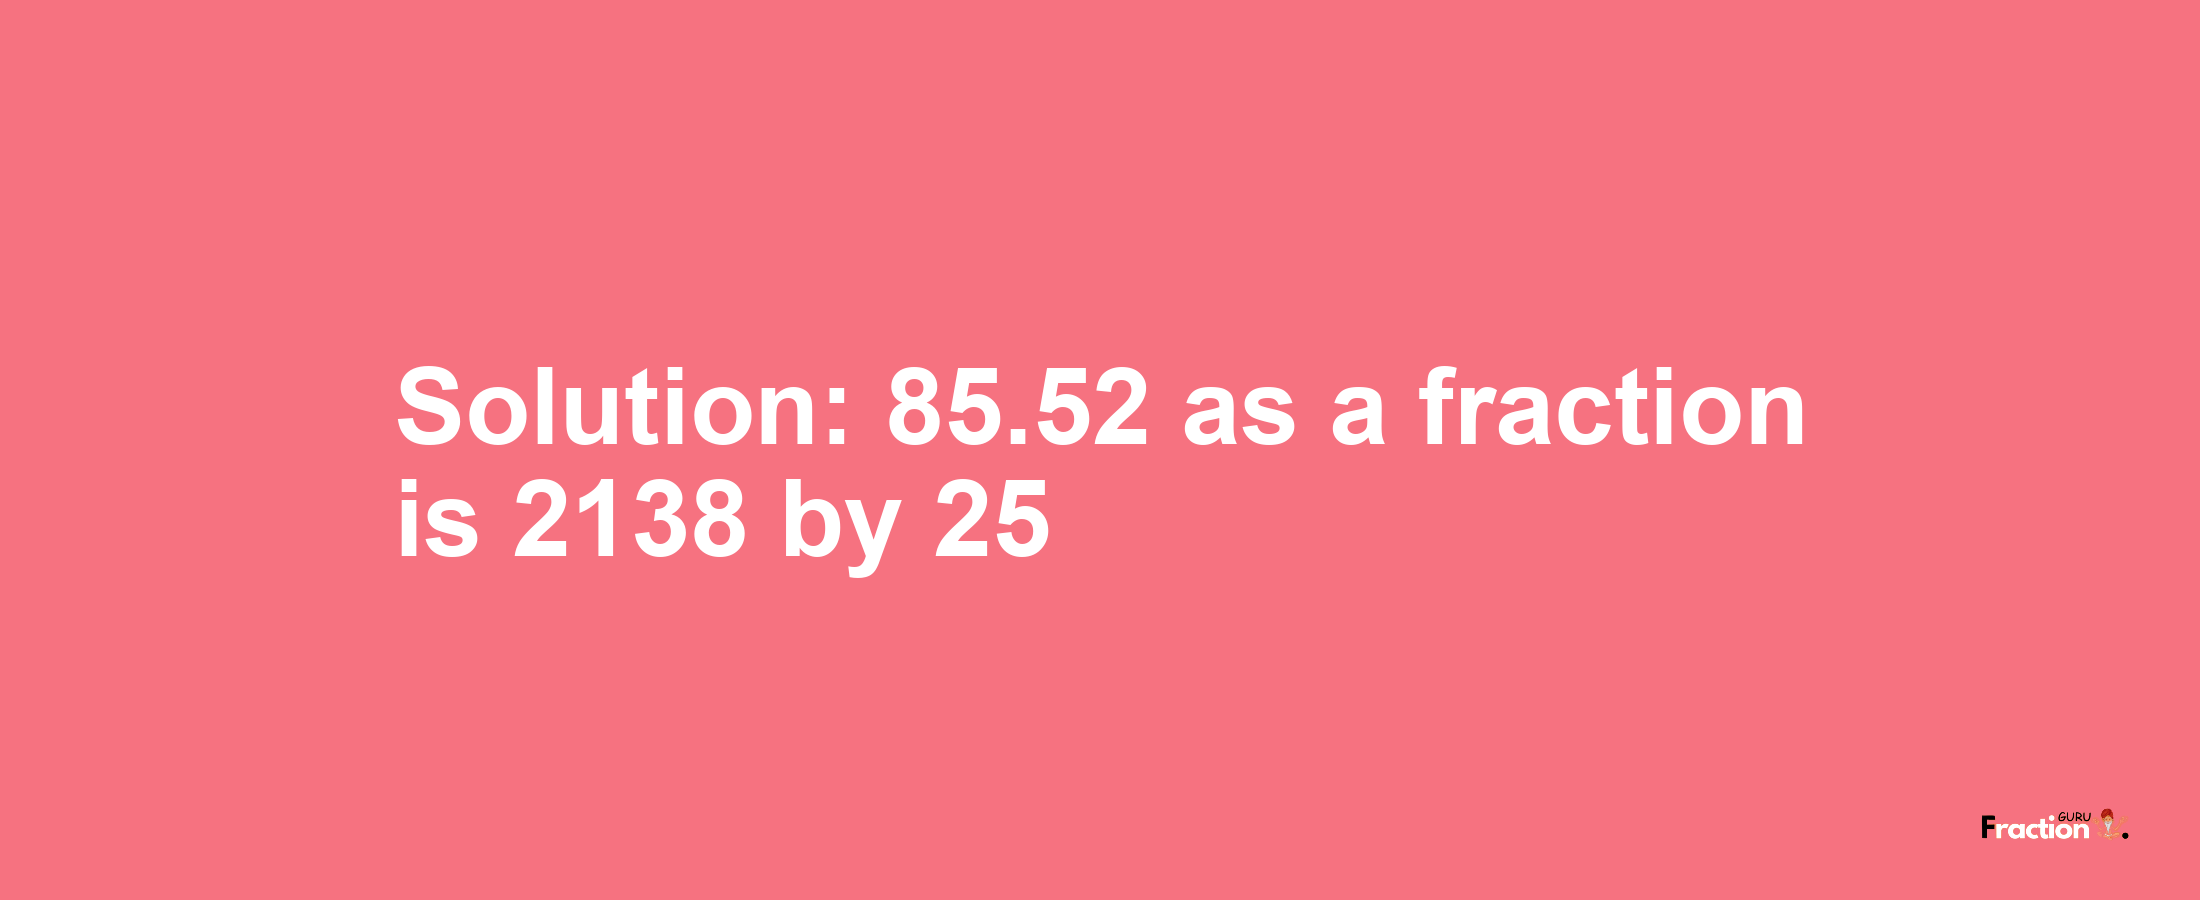 Solution:85.52 as a fraction is 2138/25